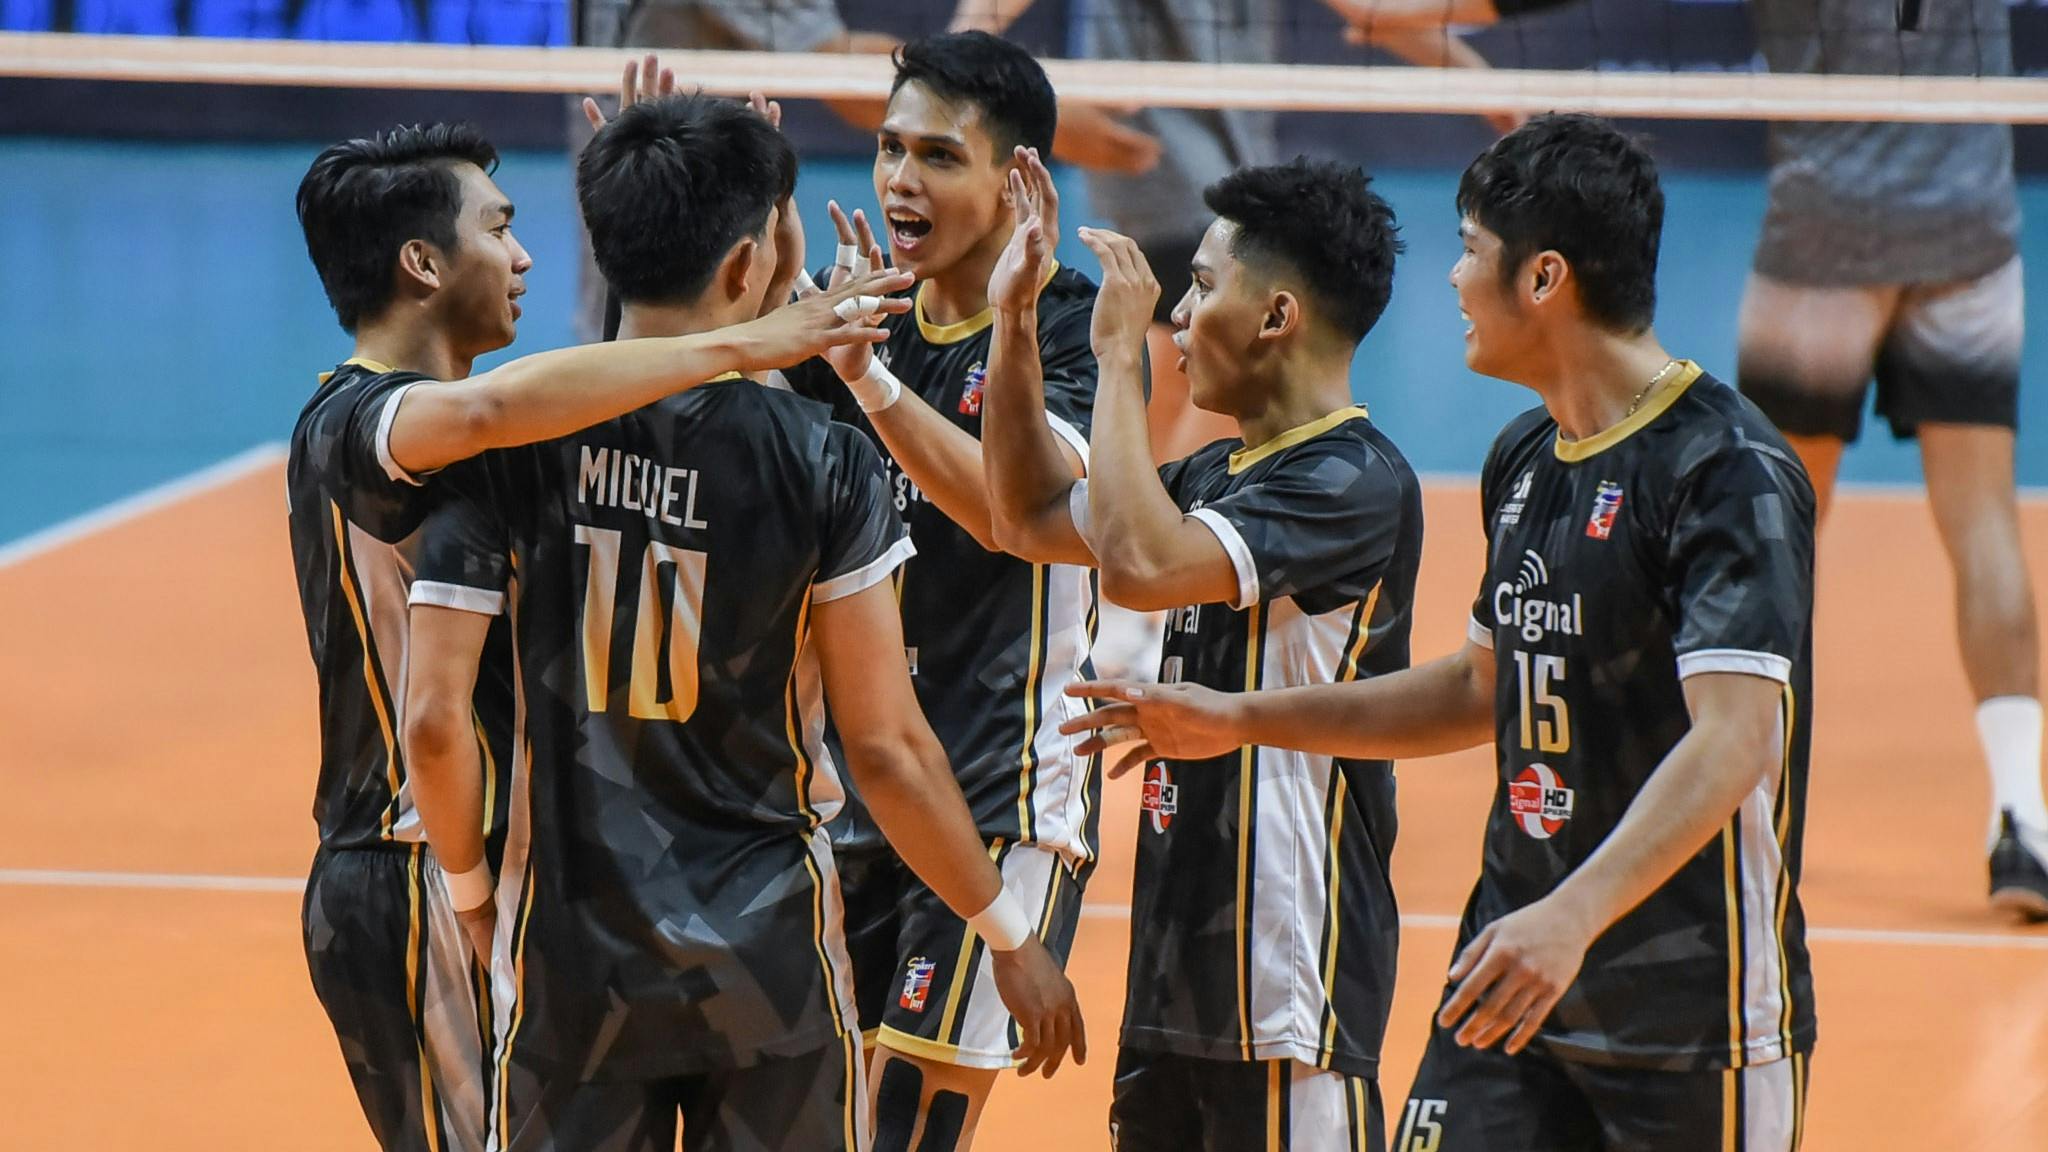 Cignal completes historic, undefeated run to rule Spikers’ Turf Open Conference 